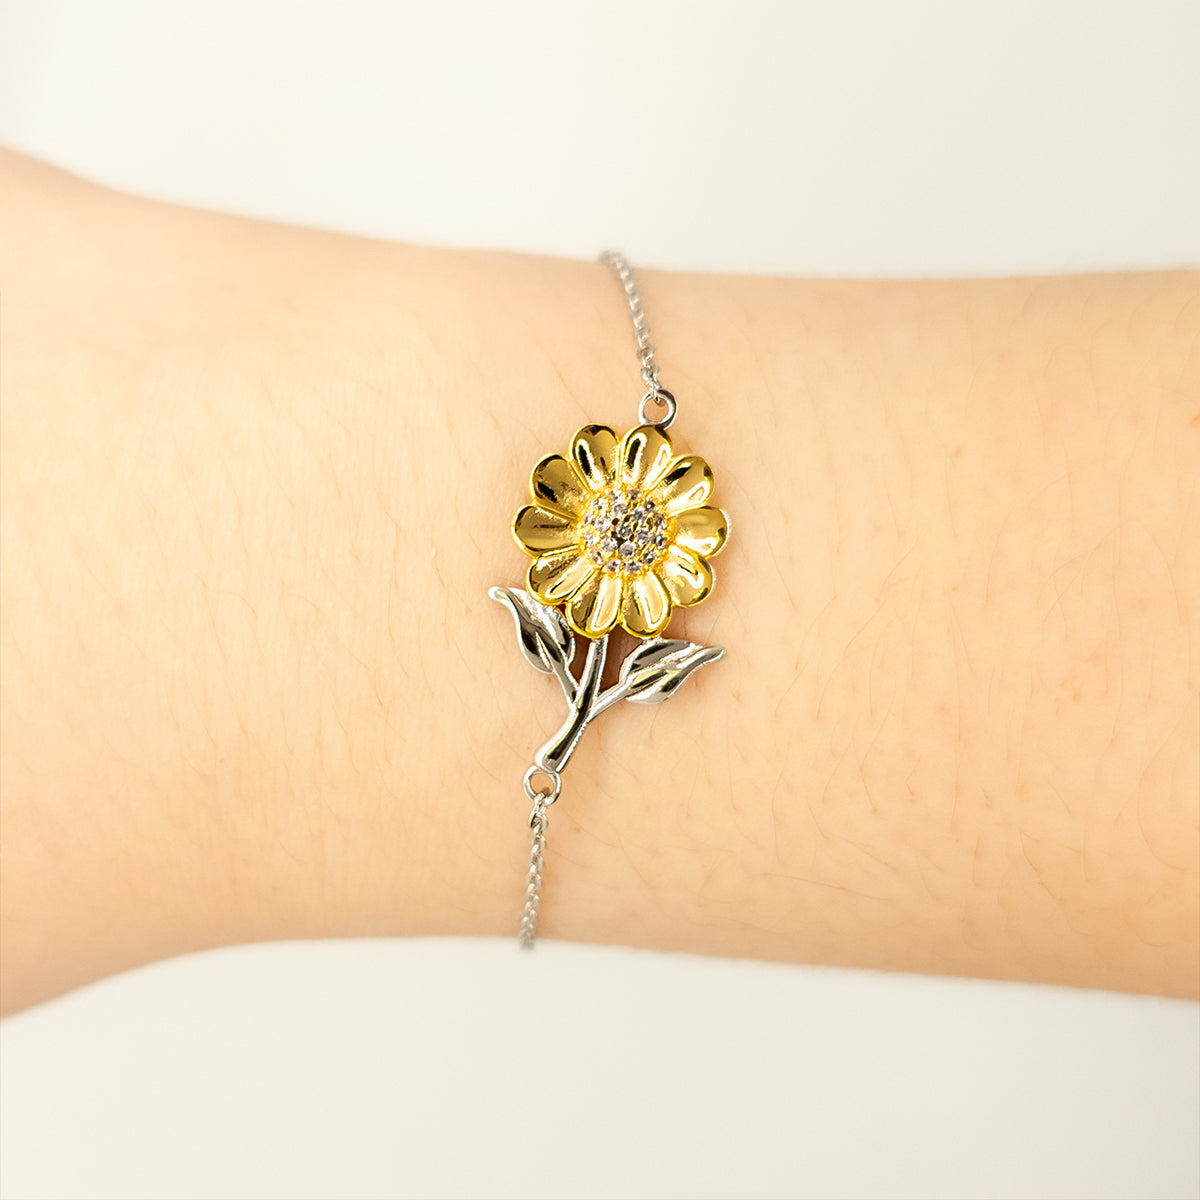 Mother In Law Sunflower Bracelet You Will Always Have a Special Place in My Heart Inspirational Gift for Birthday, Christmas, and Holidays